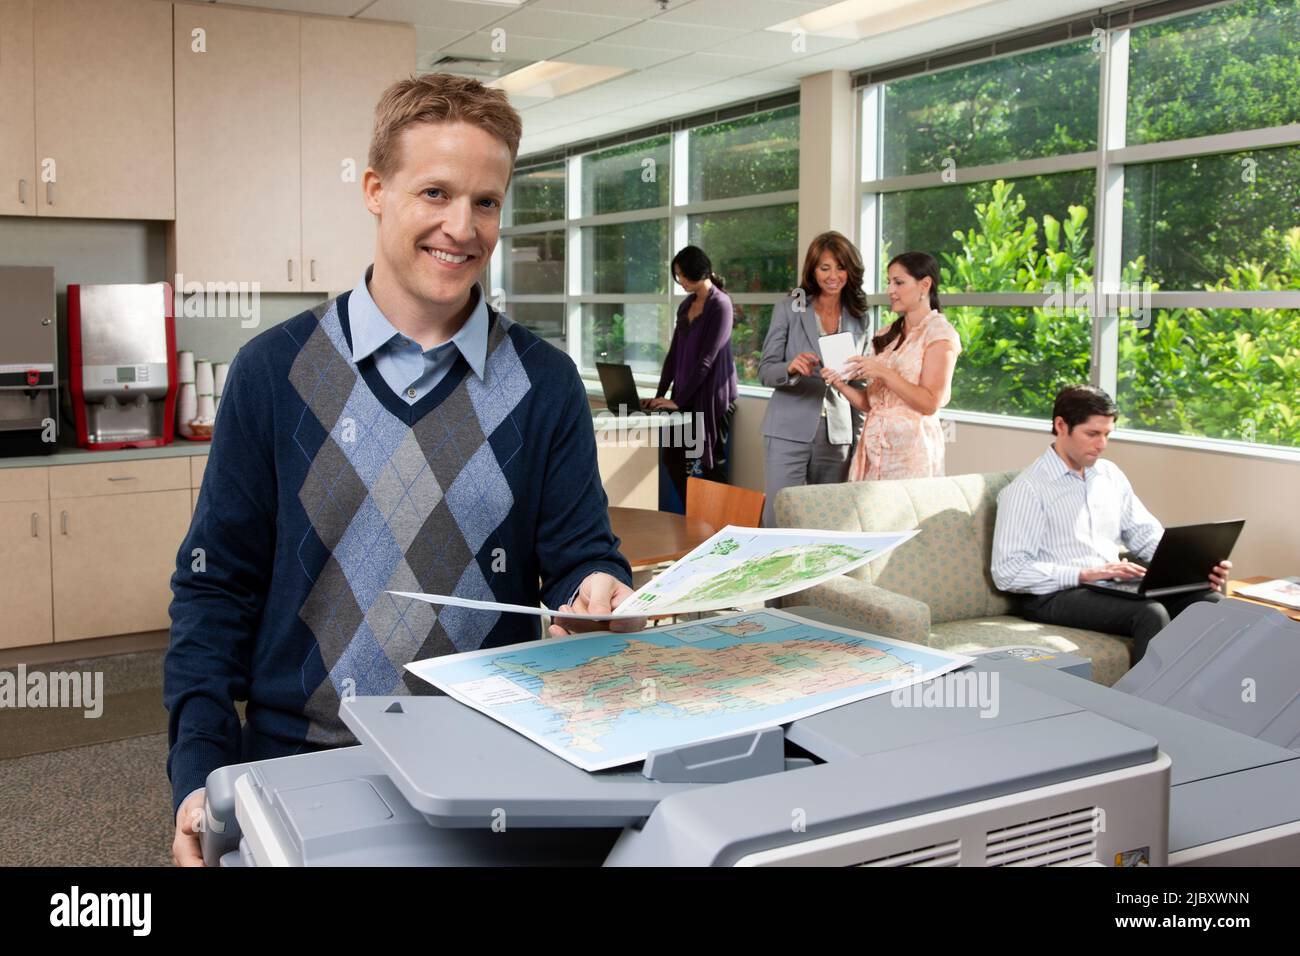 Portrait of a Caucasian man standing at a printer while in breakroom. Stock Photo